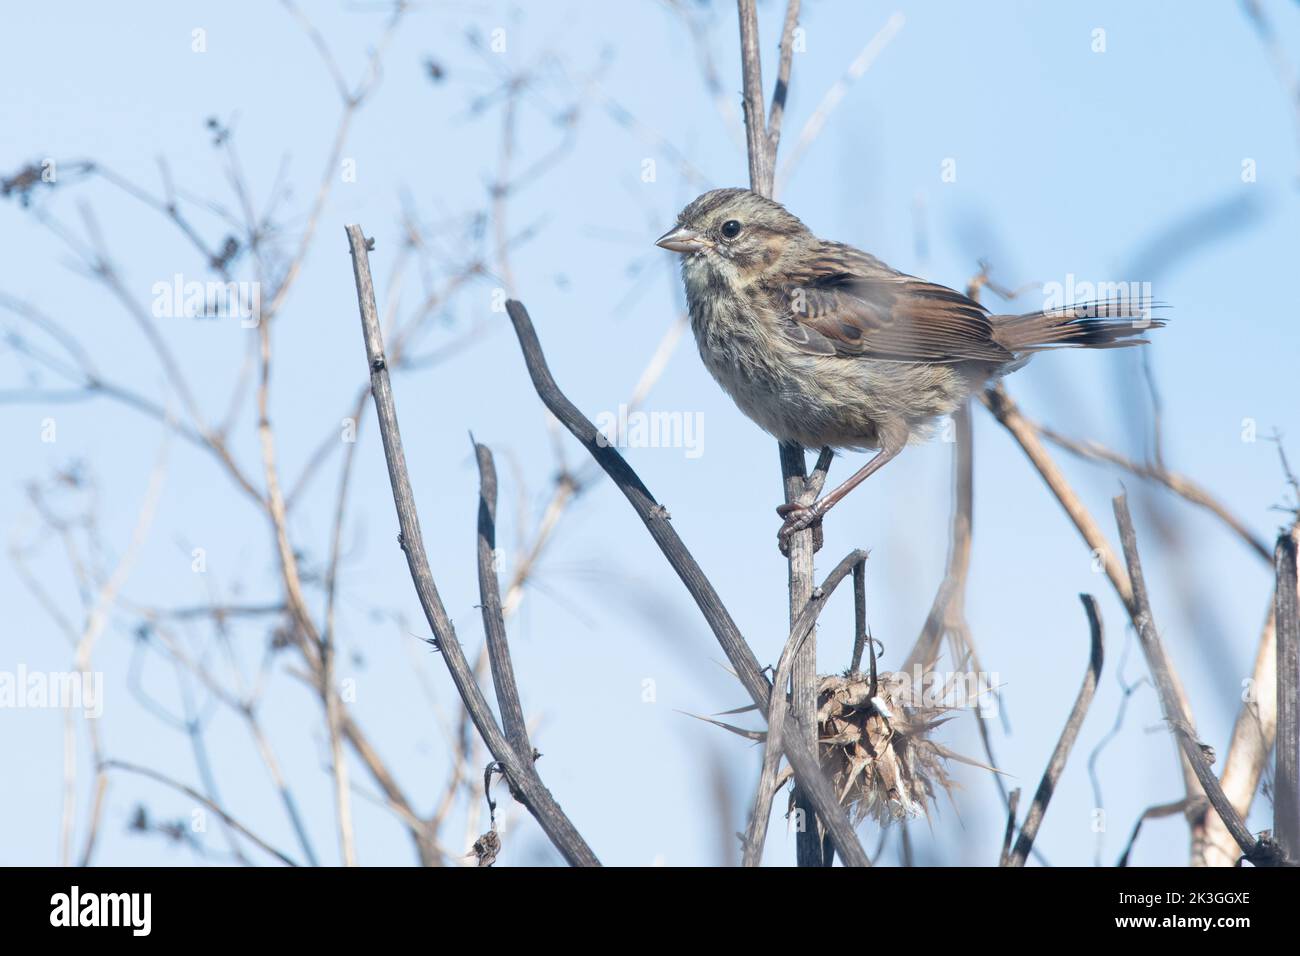 A song sparrow (Melospiza melodia) perched on dry brush in Point Reyes National Seashore in California. Stock Photo